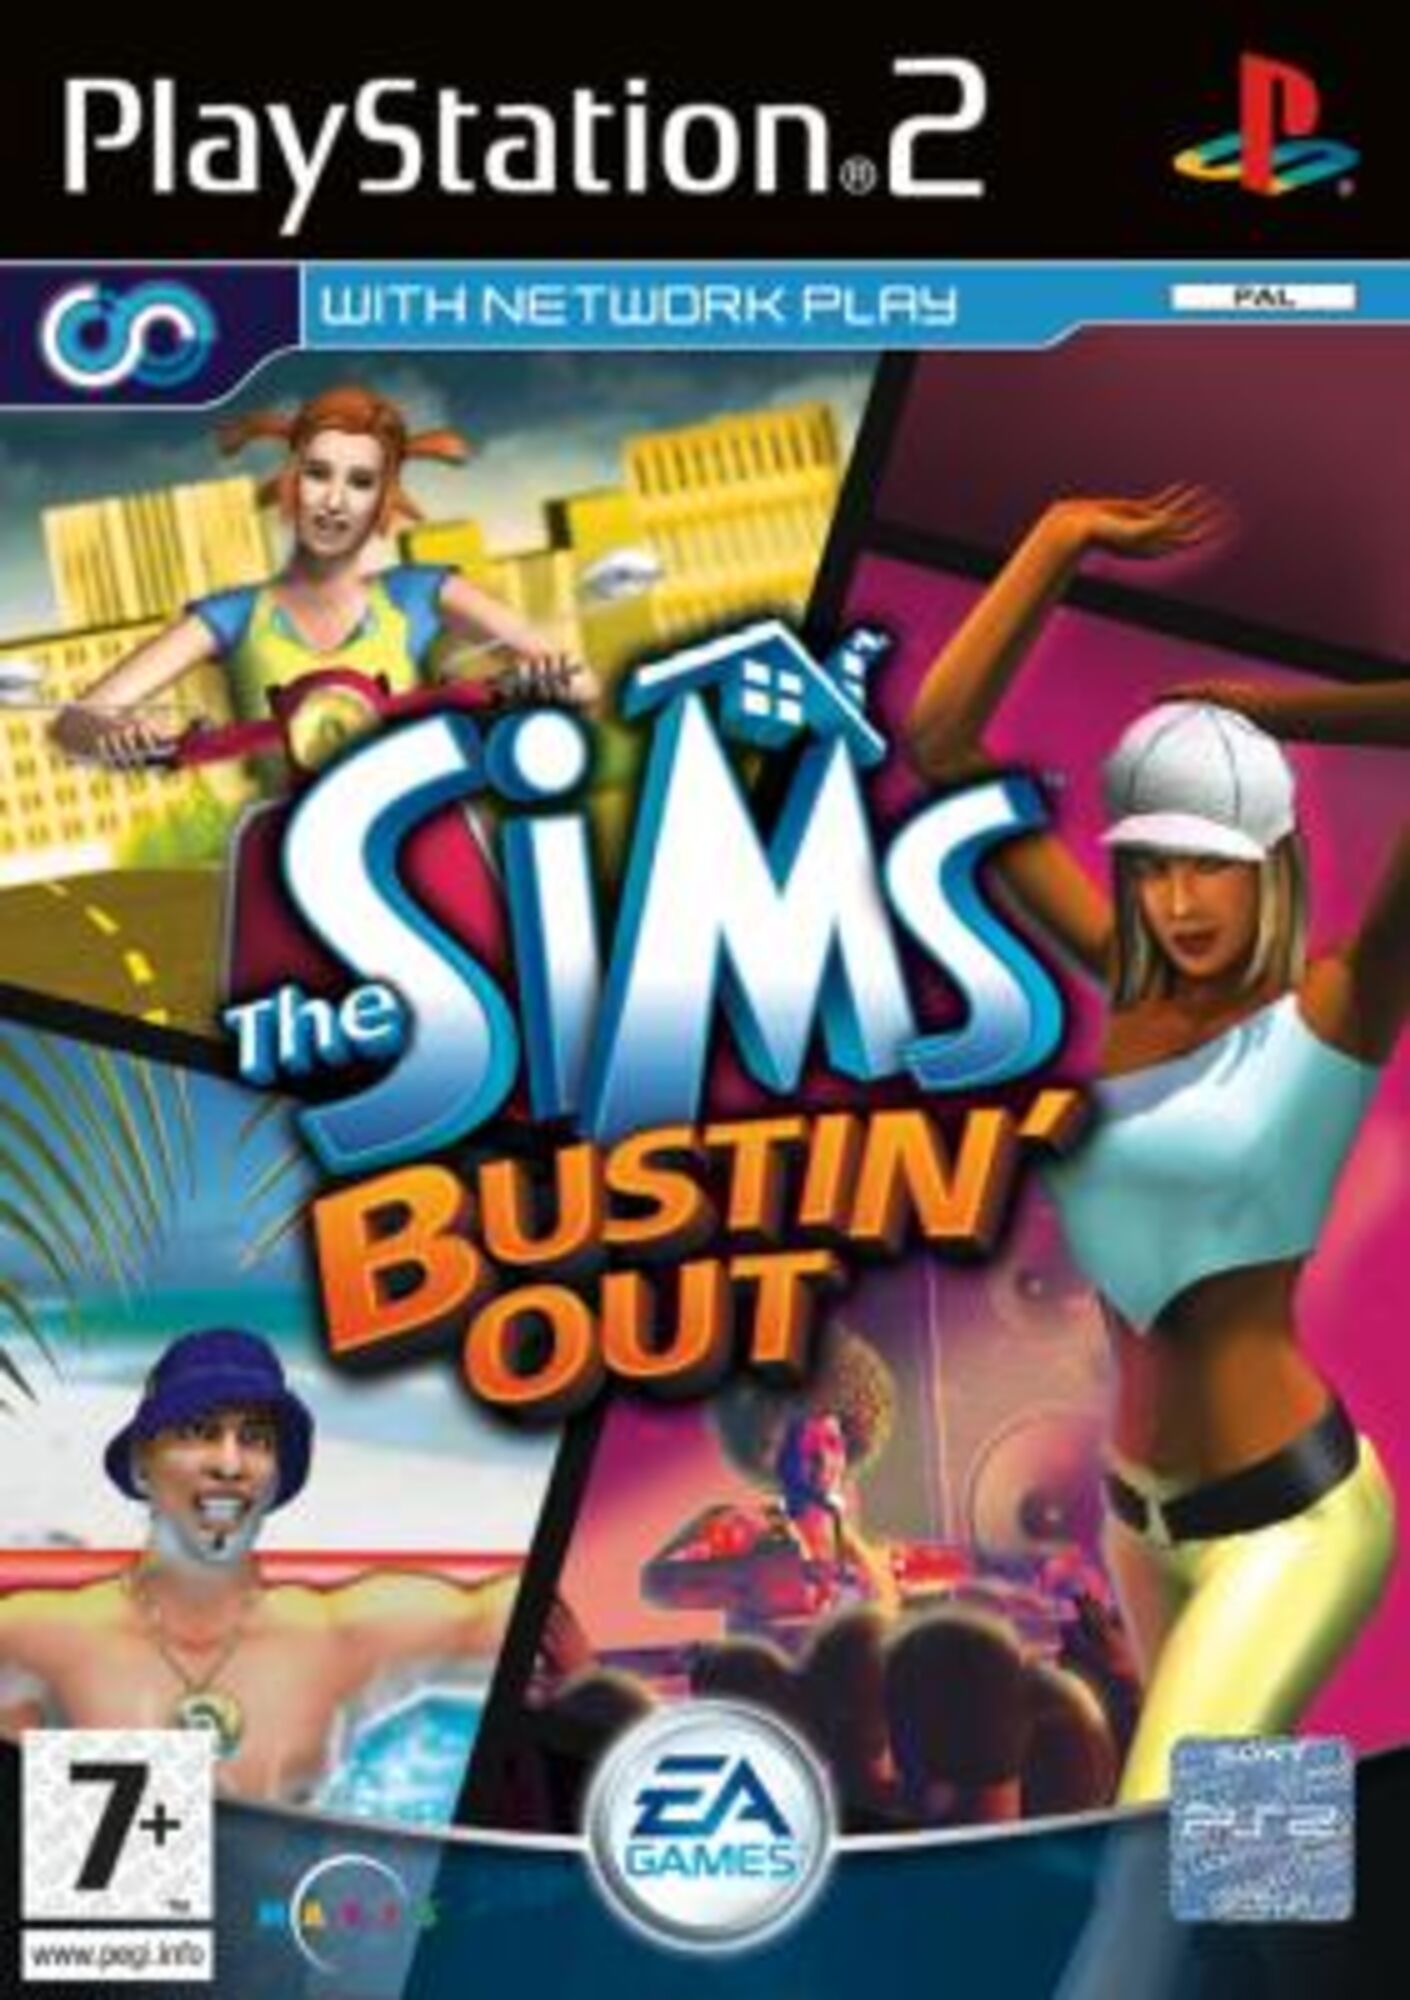 the sims bustin out pc download